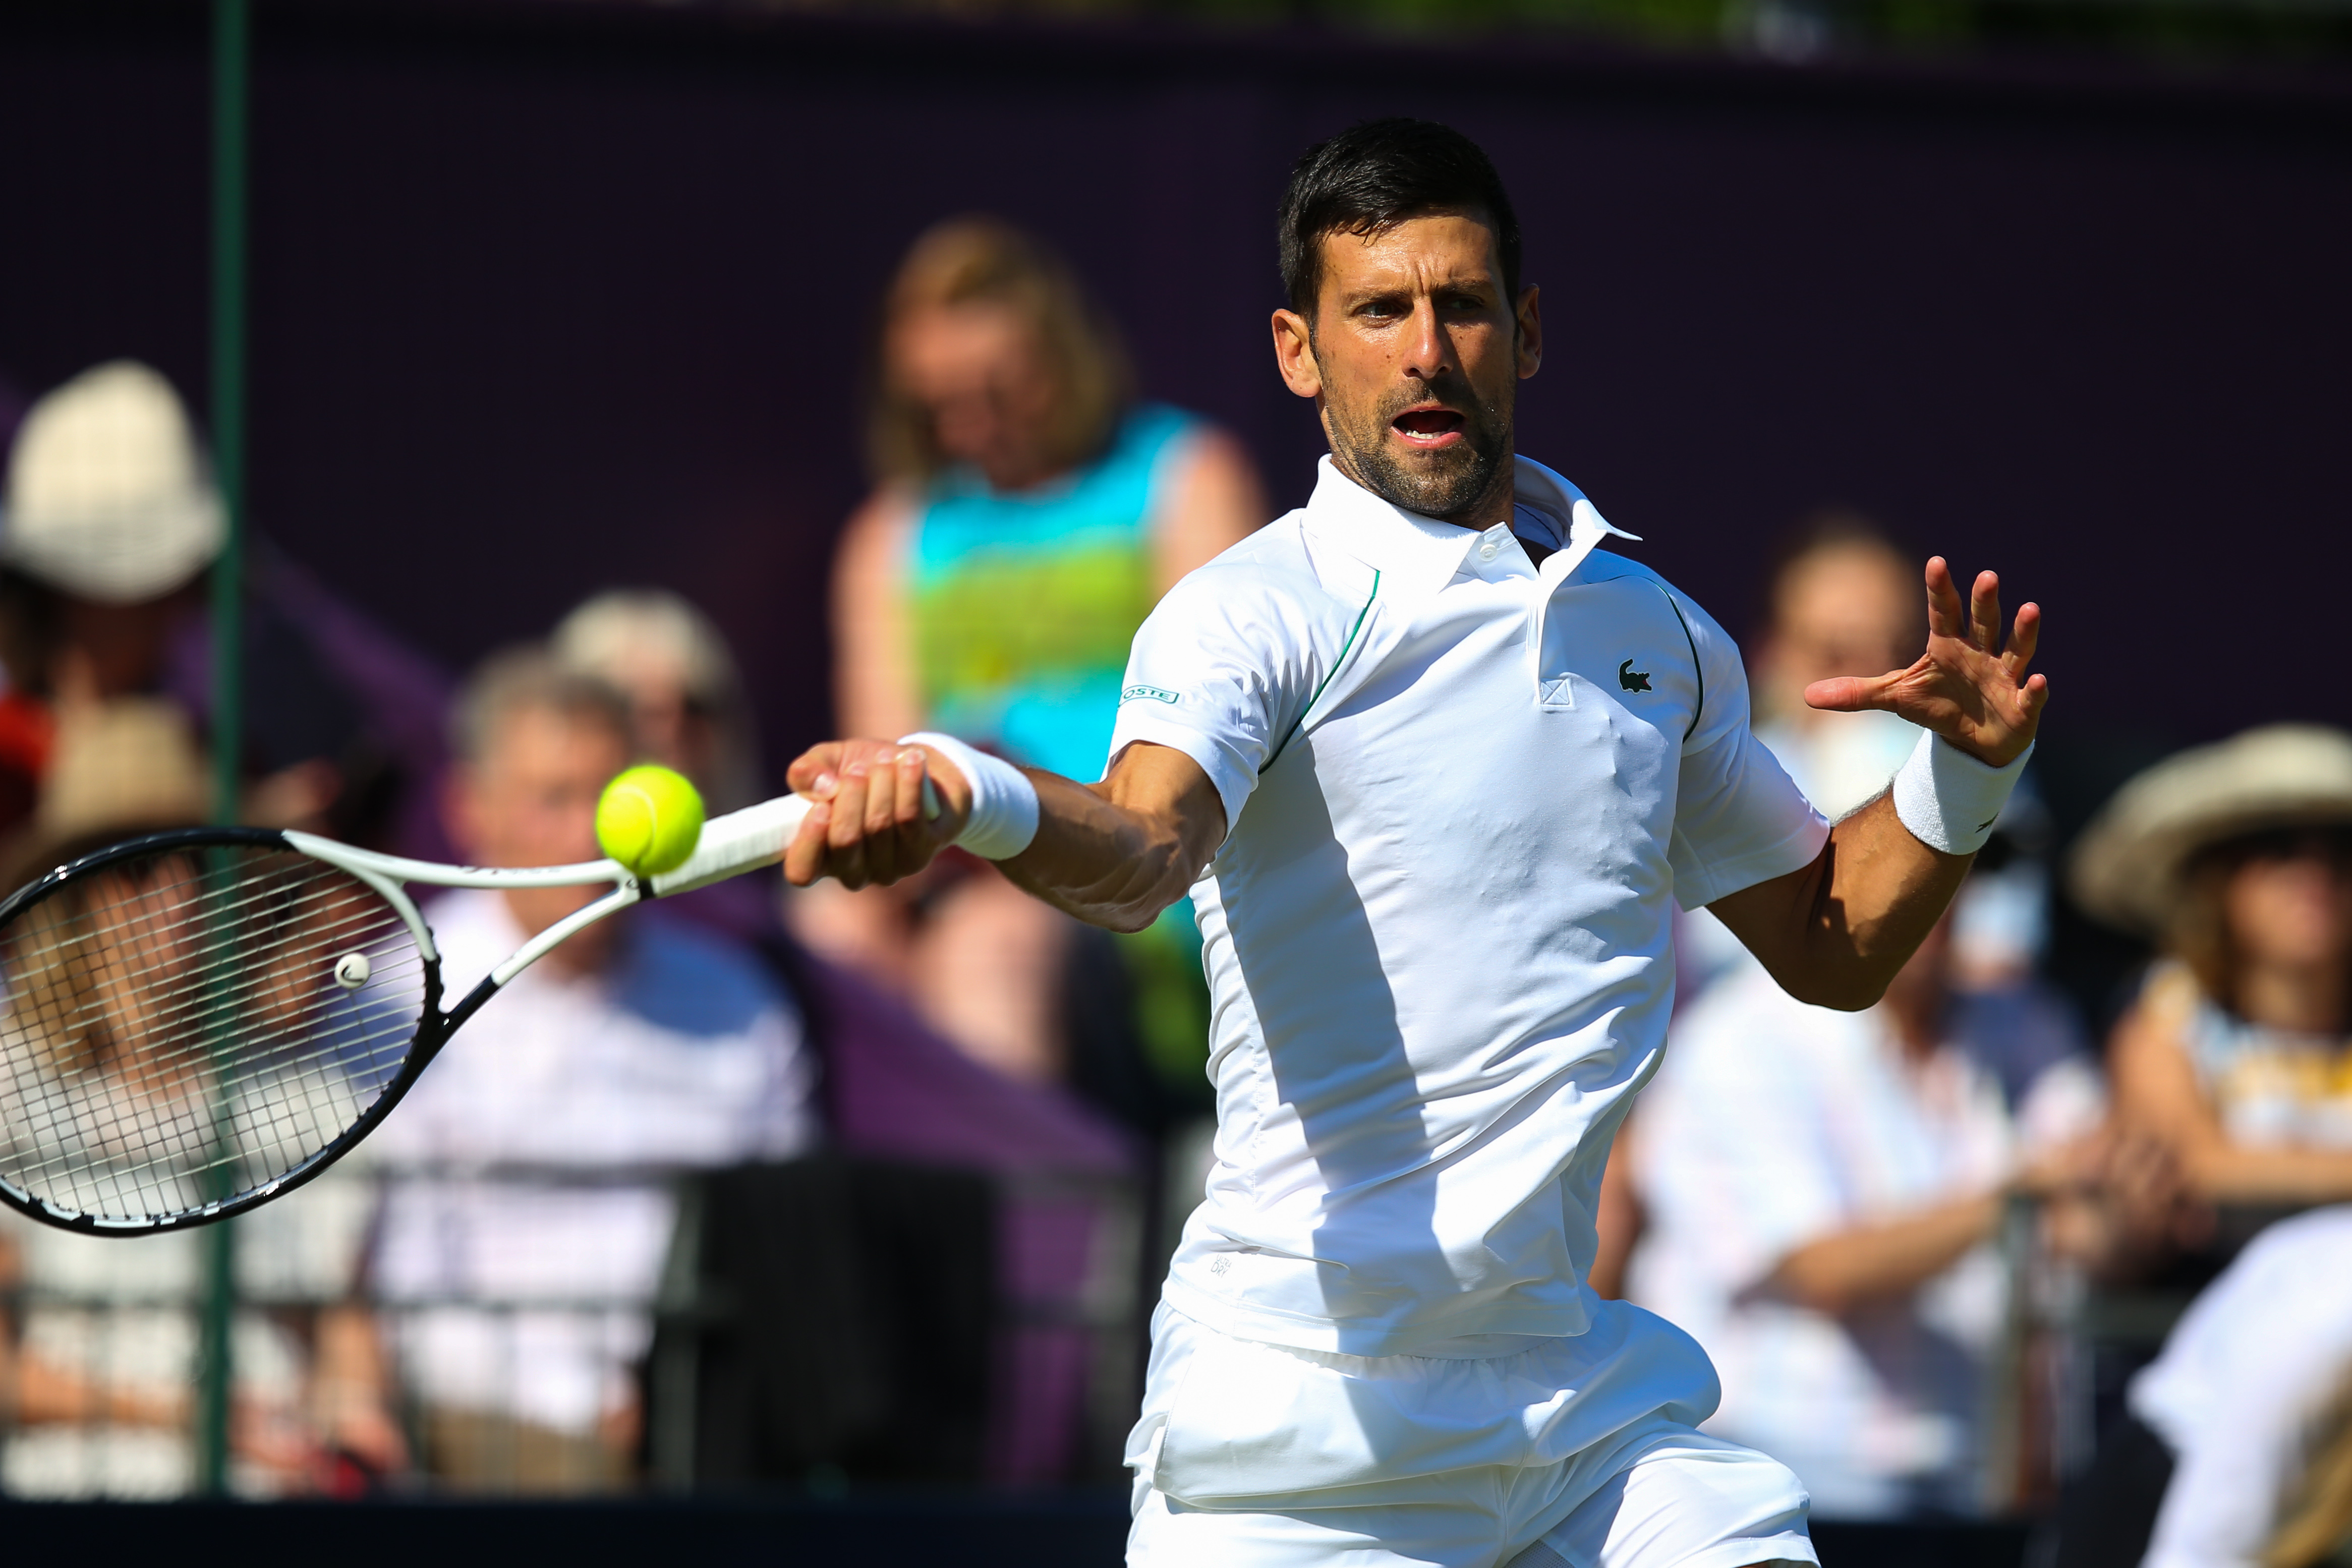 Novak Djokovic plays a forehand in his match against Felix Auger-Aliassime of Canada during day two of the Giorgio Armani Tennis Classic at The Hurlingham Club on June 22, 2022 in London, England.